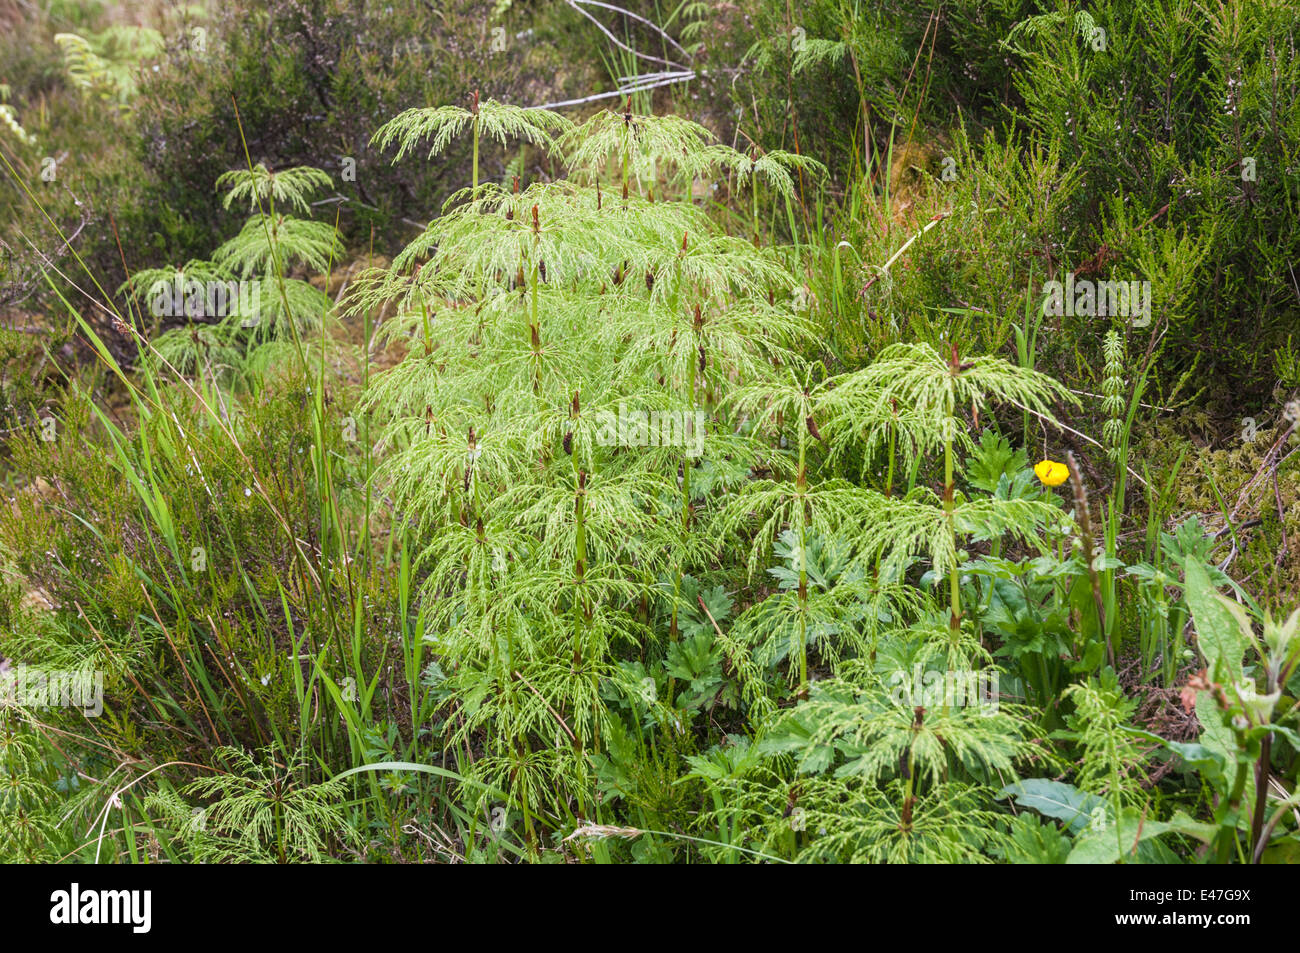 The plant Horse Tail, Equisetum, growing near Victoria falls, Loch Maree Scotland. Stock Photo